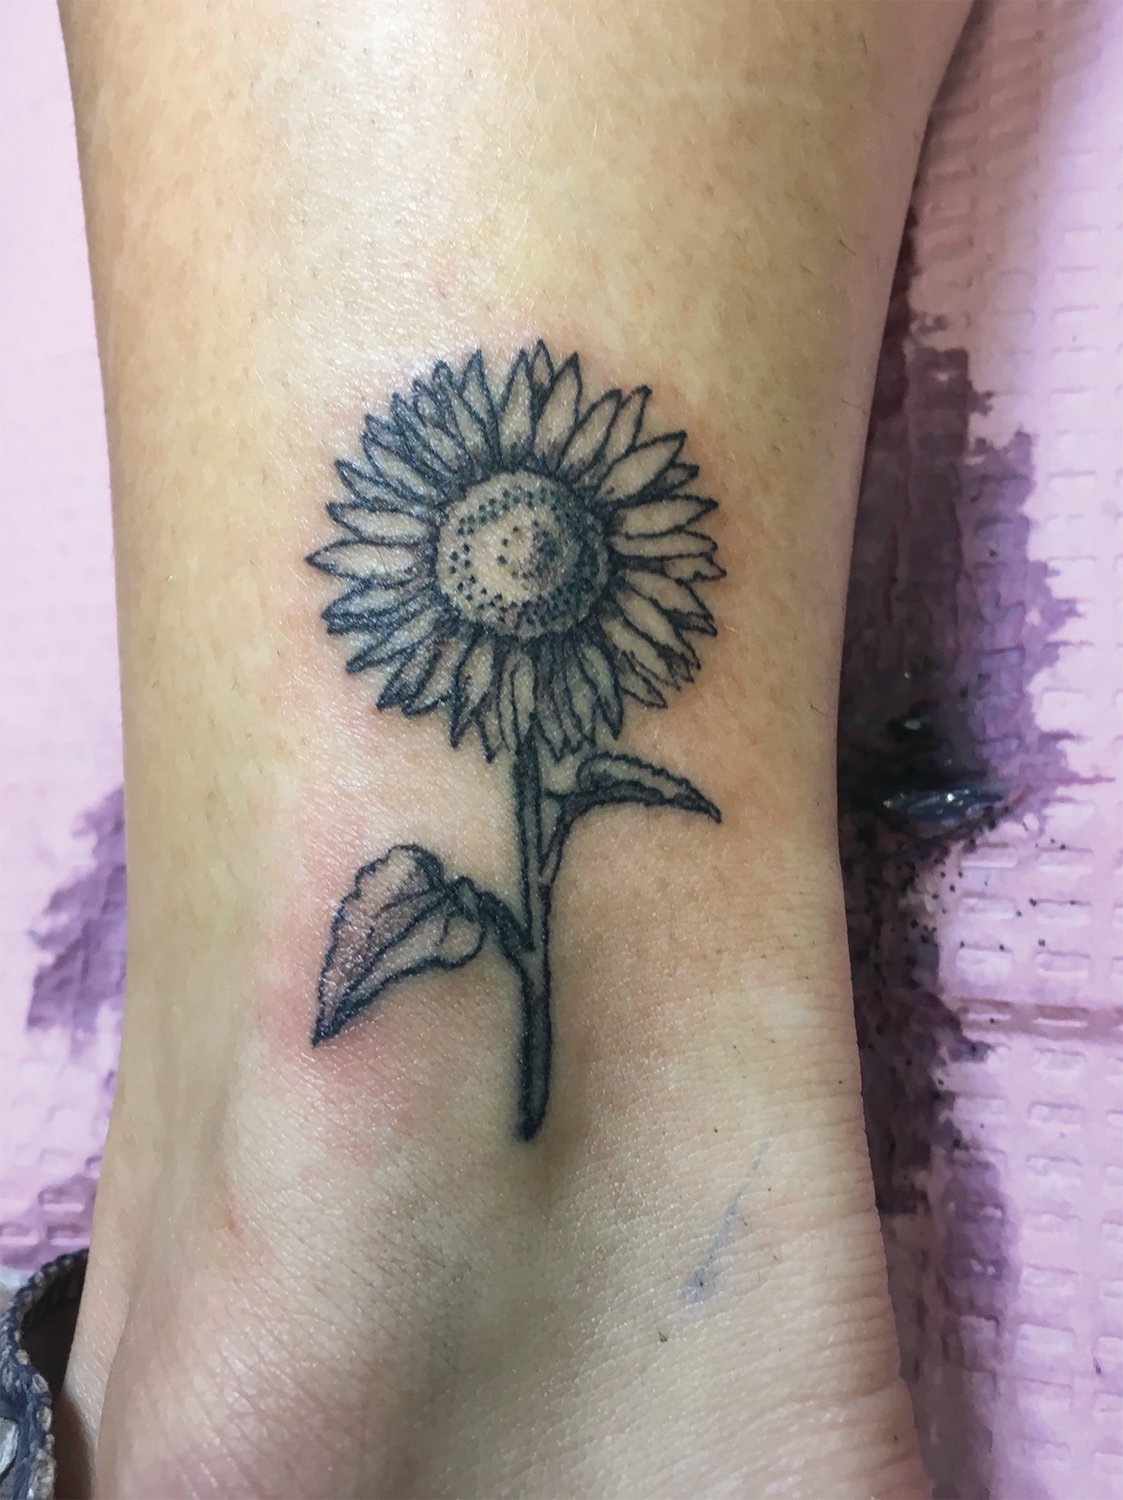 A sunflower tattoo inked by Chelsea Stowers.